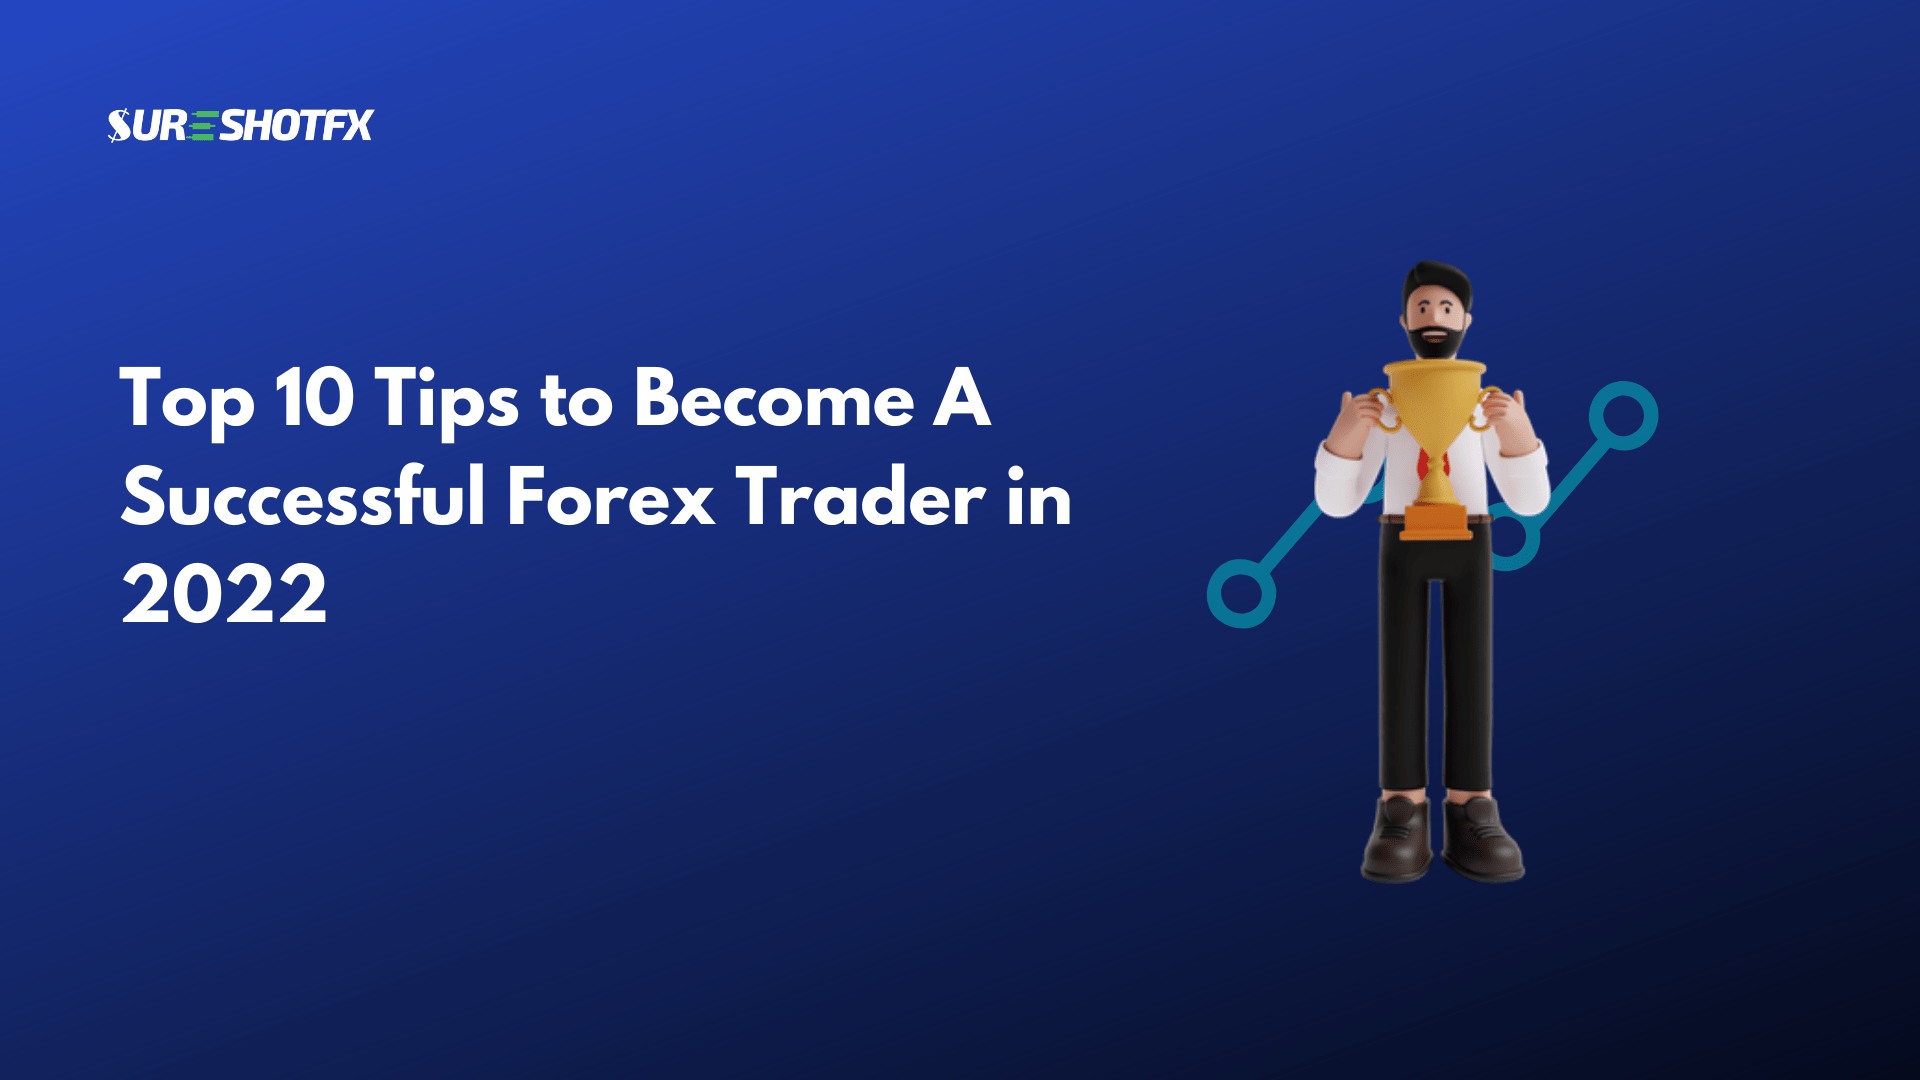 Top 10 Tips to Become A Successful Forex Trader in 2022